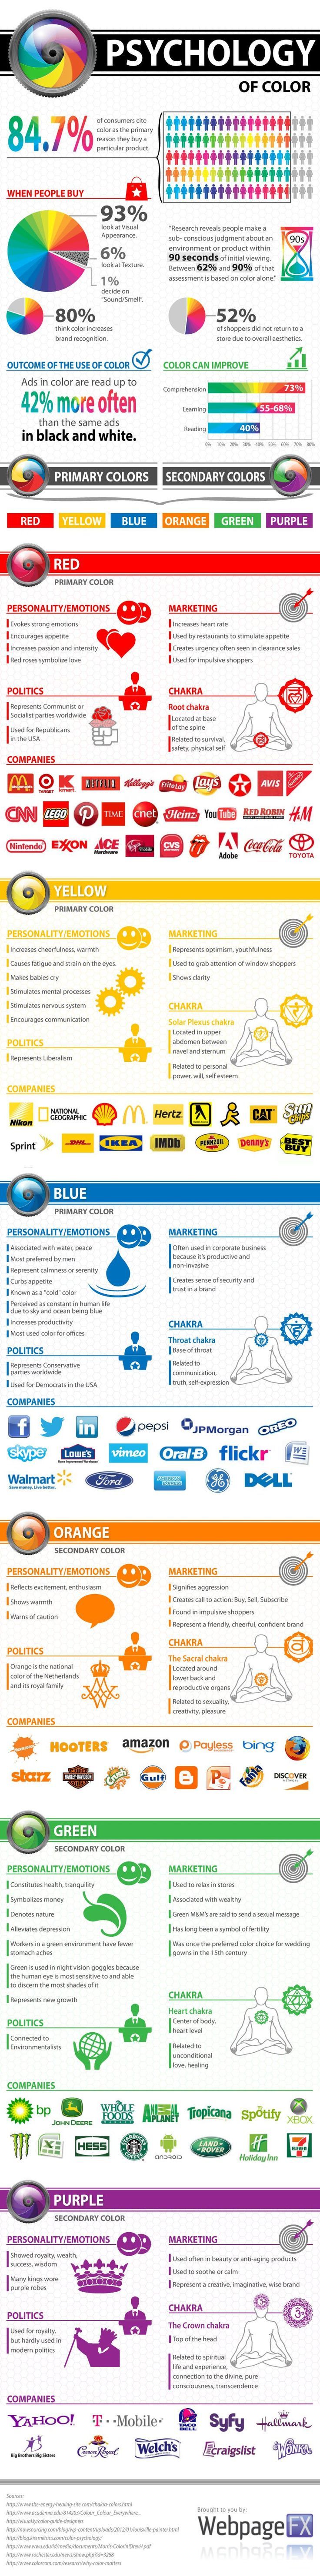 1531881976_11_Marketing-Infographic-Curious-about-the-psychology-of-color-Wondering-how-color-influences-marketing Marketing Infographic : Curious about the psychology of color? Wondering how color influences marketing ...